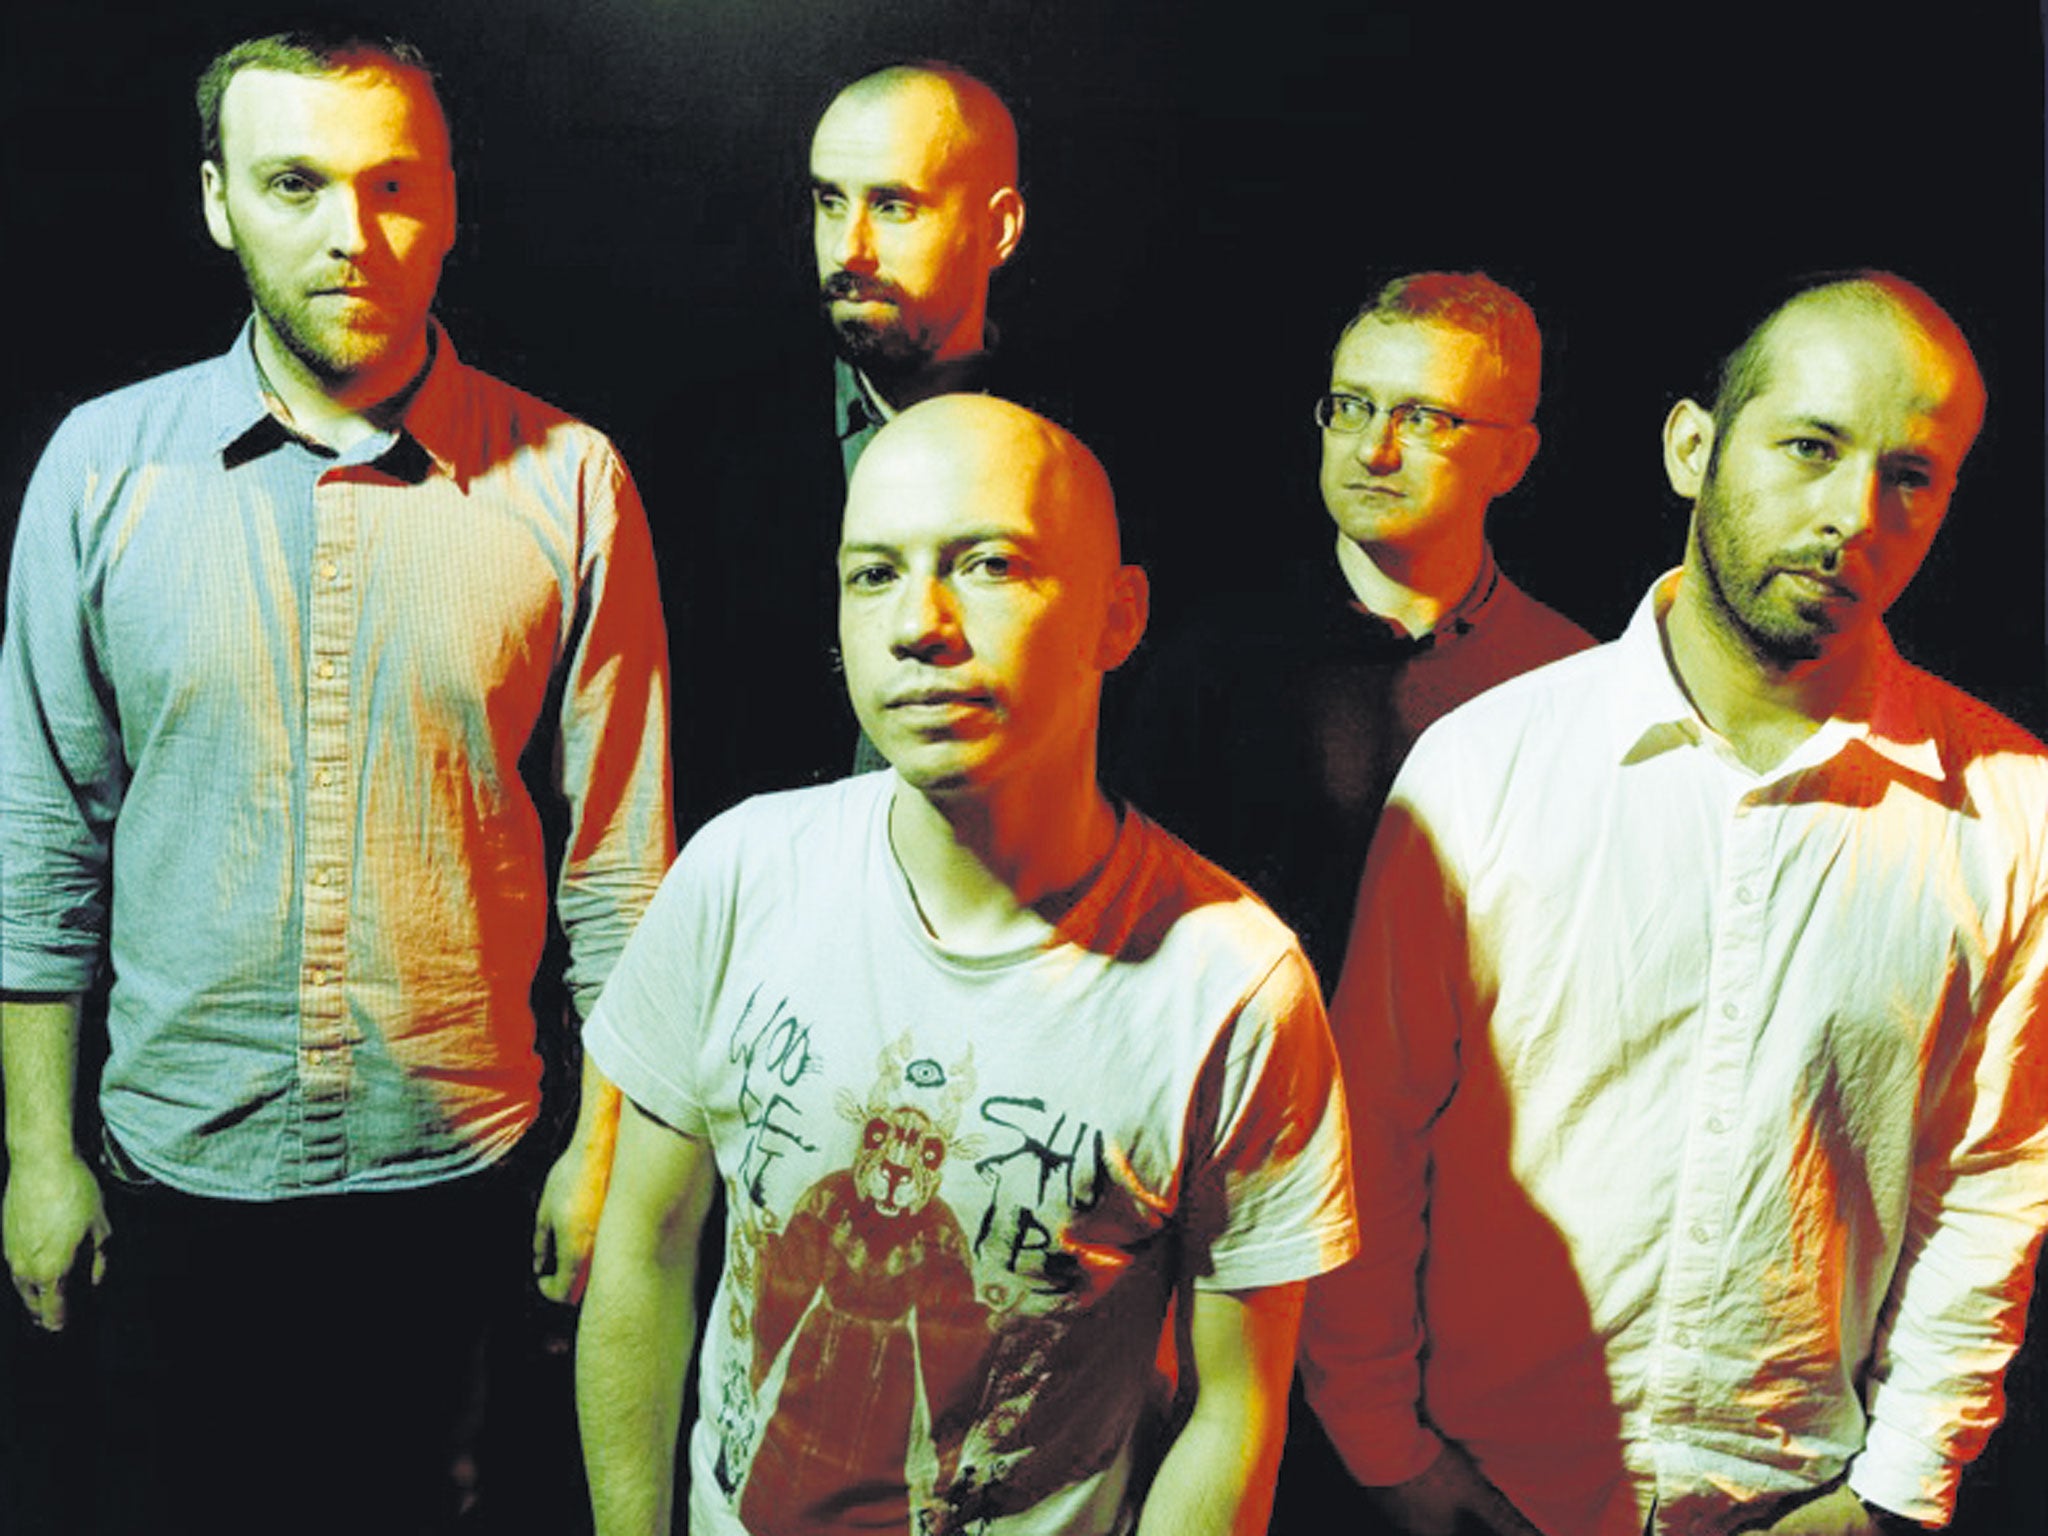 Mogwai, whose soundtrack album Les Revenants has brought them a mainstream audience after 18 years